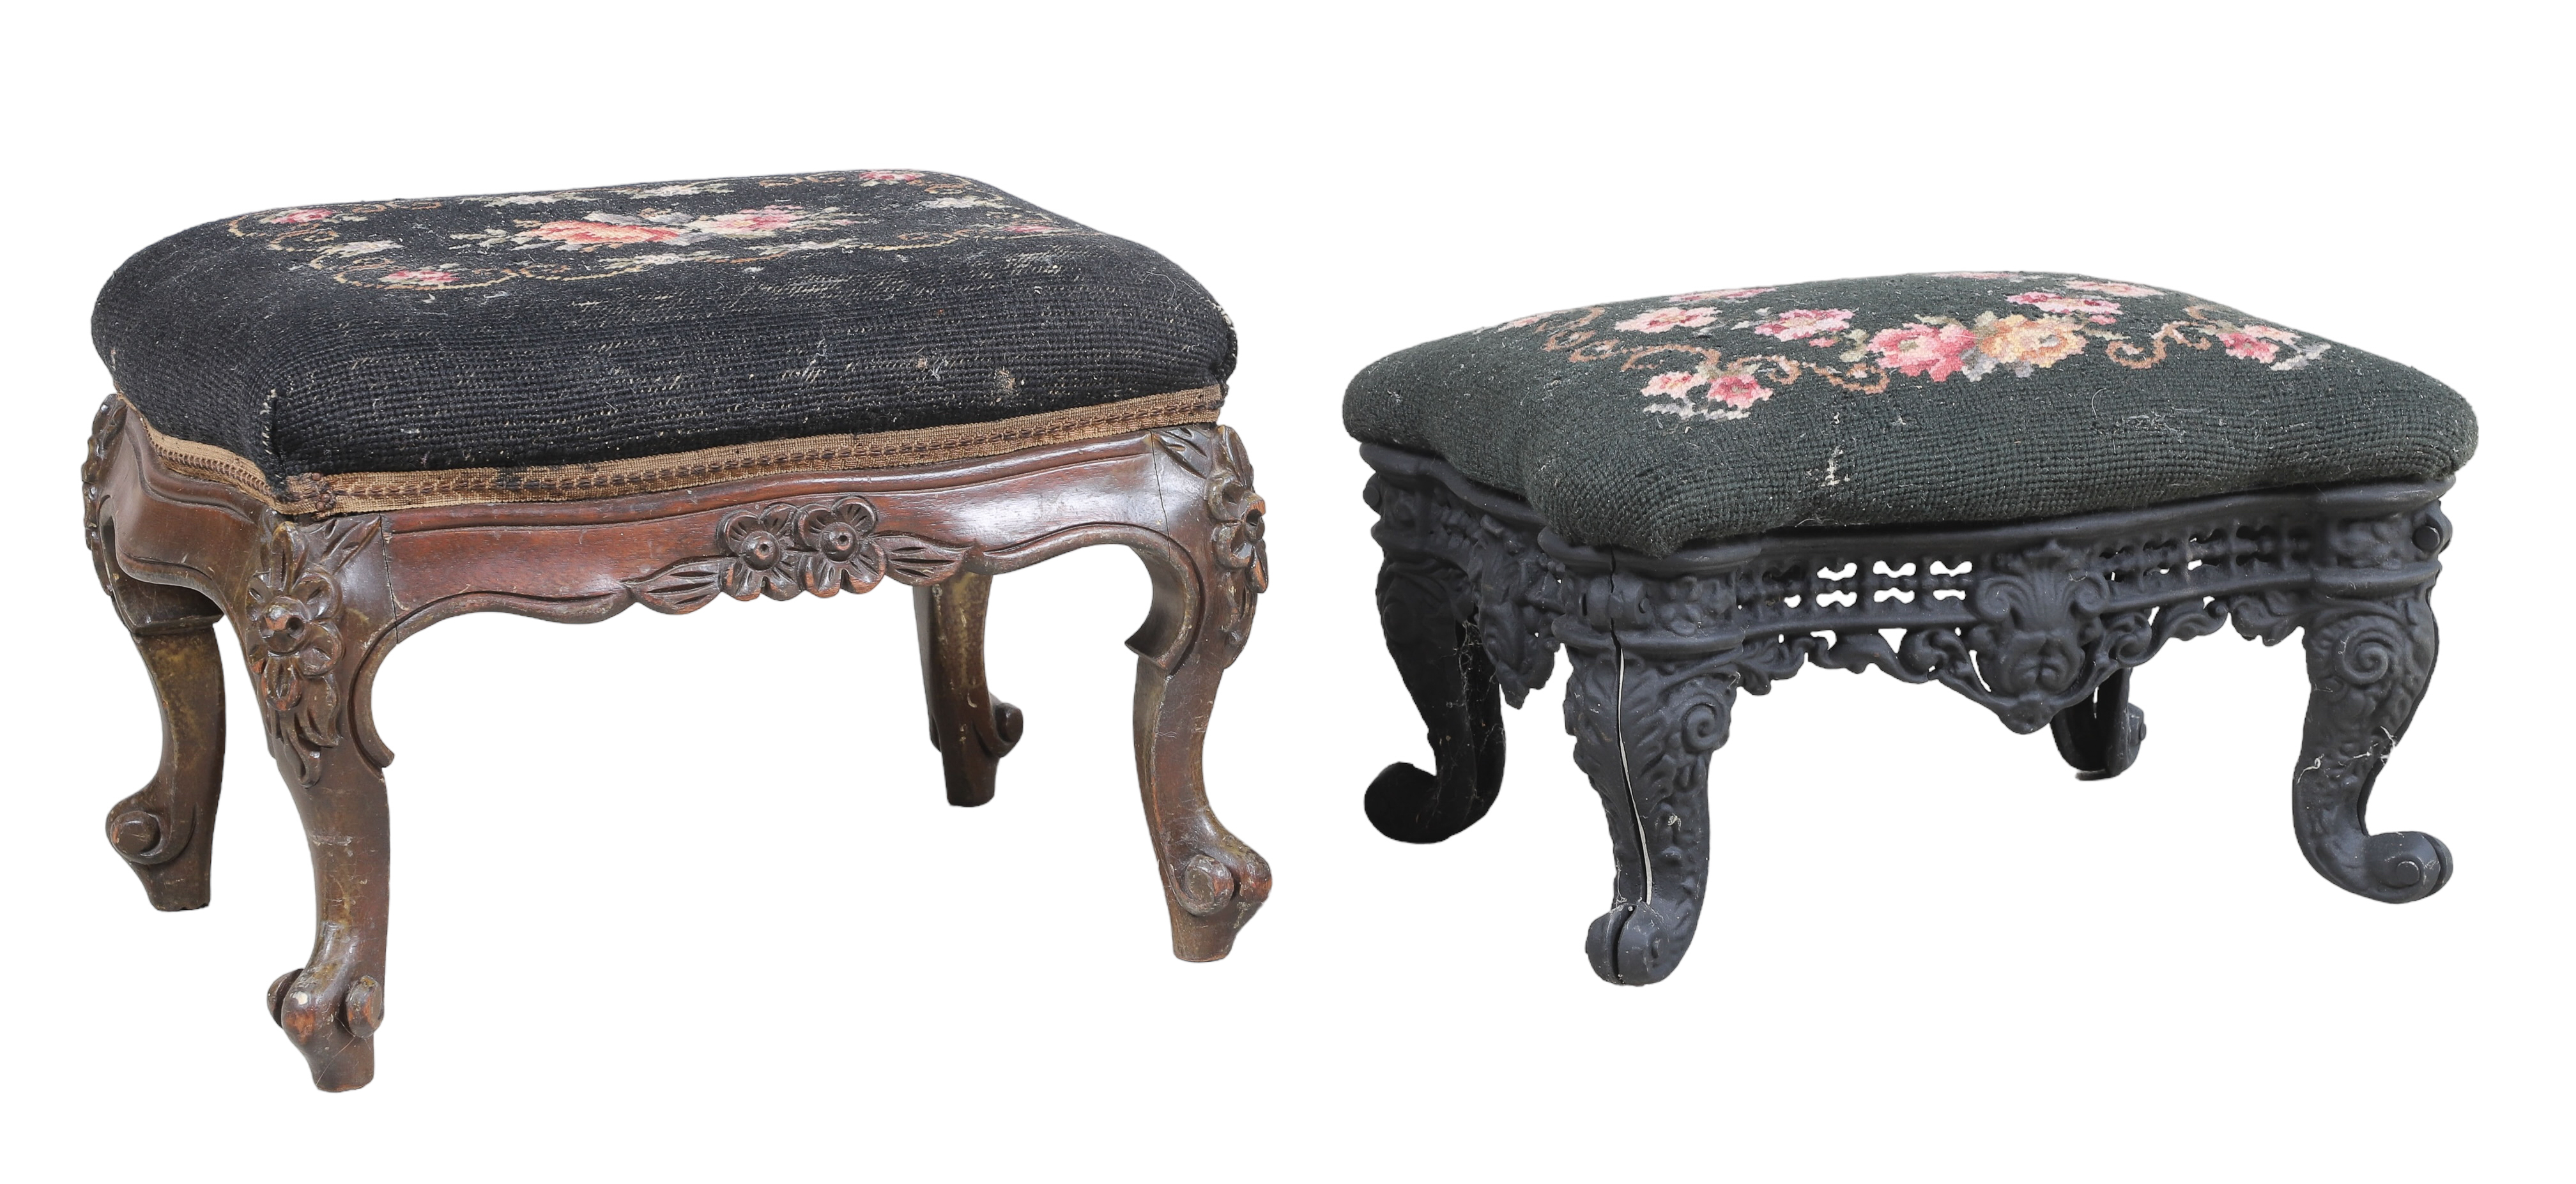  2 Upholstered Footstools Victorian 2e1dcc